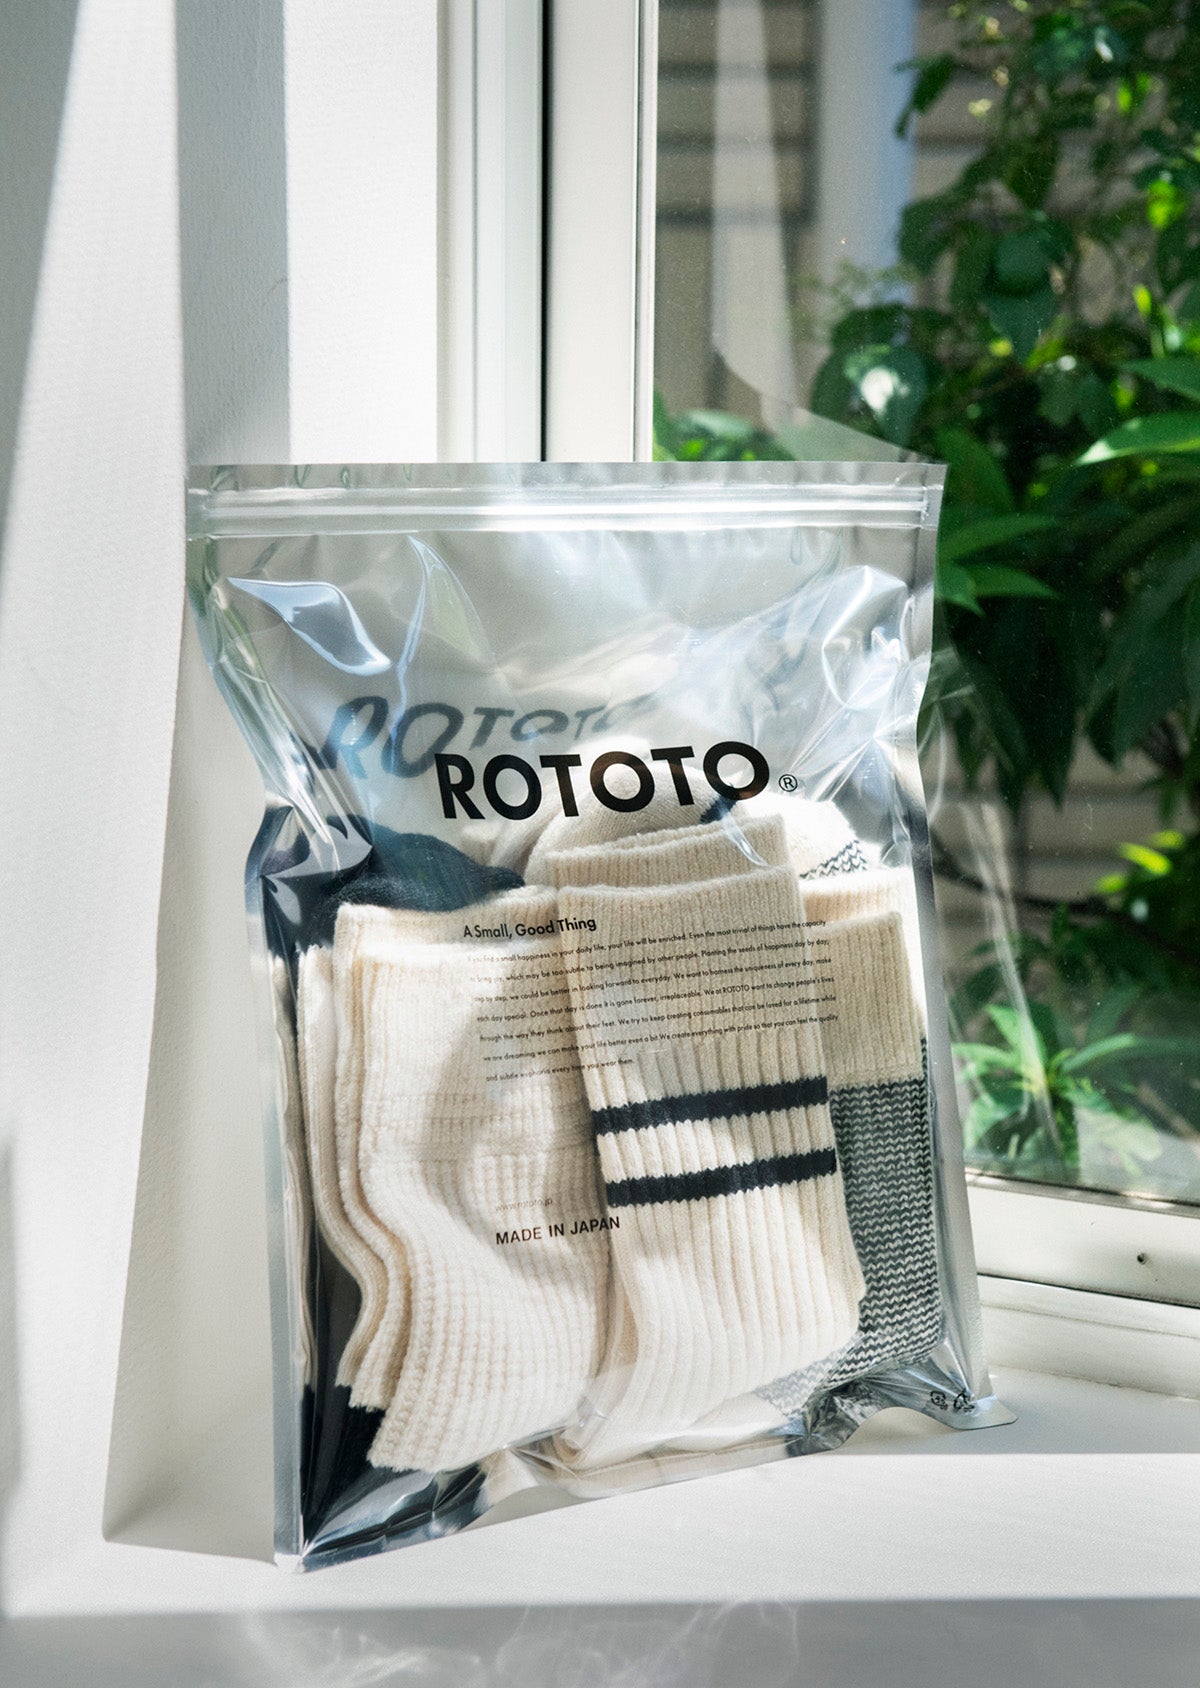 RECYCLE COTTON / WOOL DAILY 3 PACK SOCKS